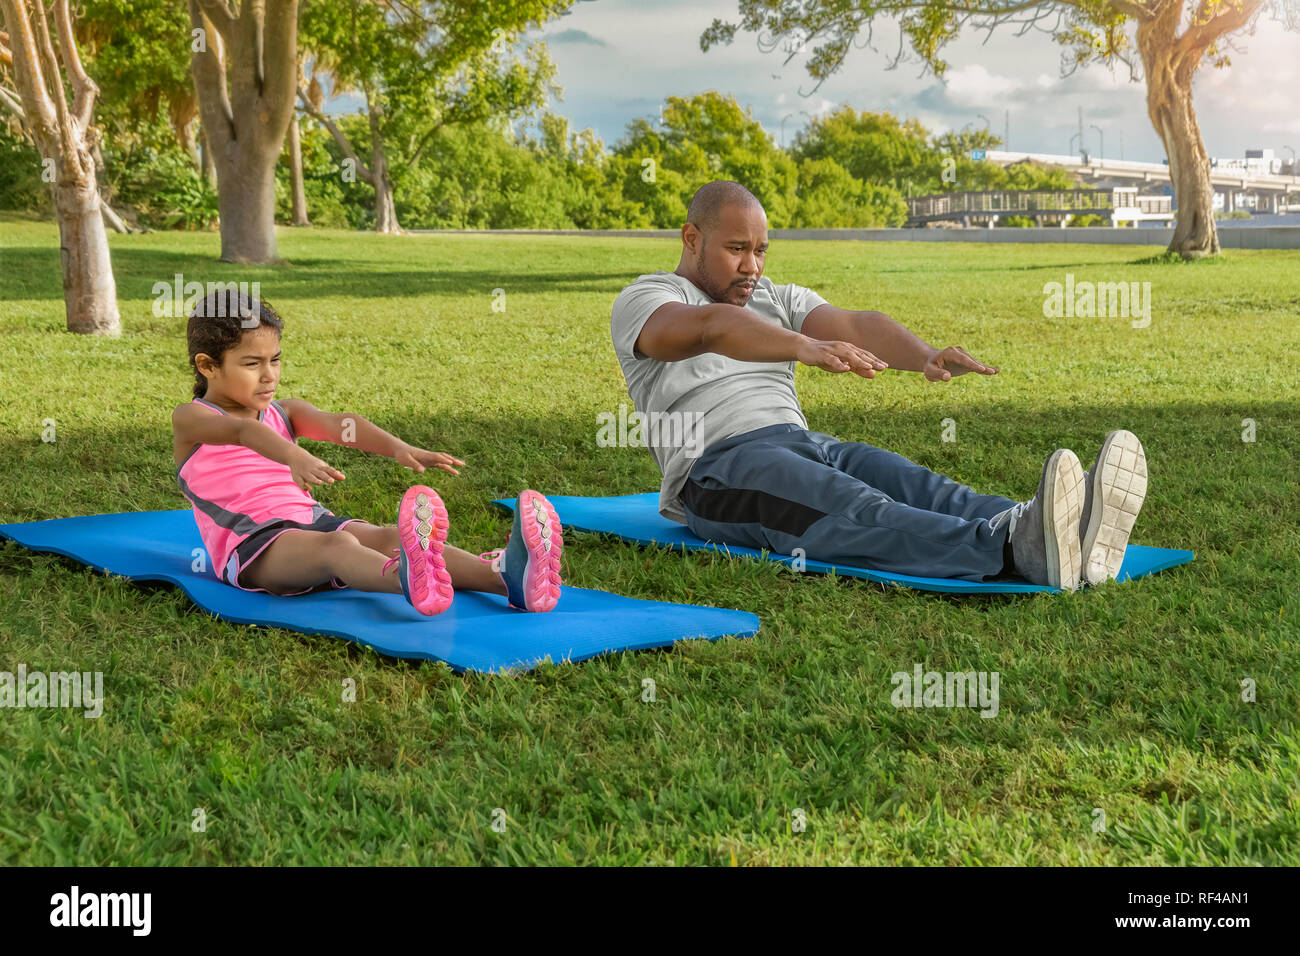 Father and daughter stick together during the morning exercise. The young girl enjoys situps with daddy. Stock Photo